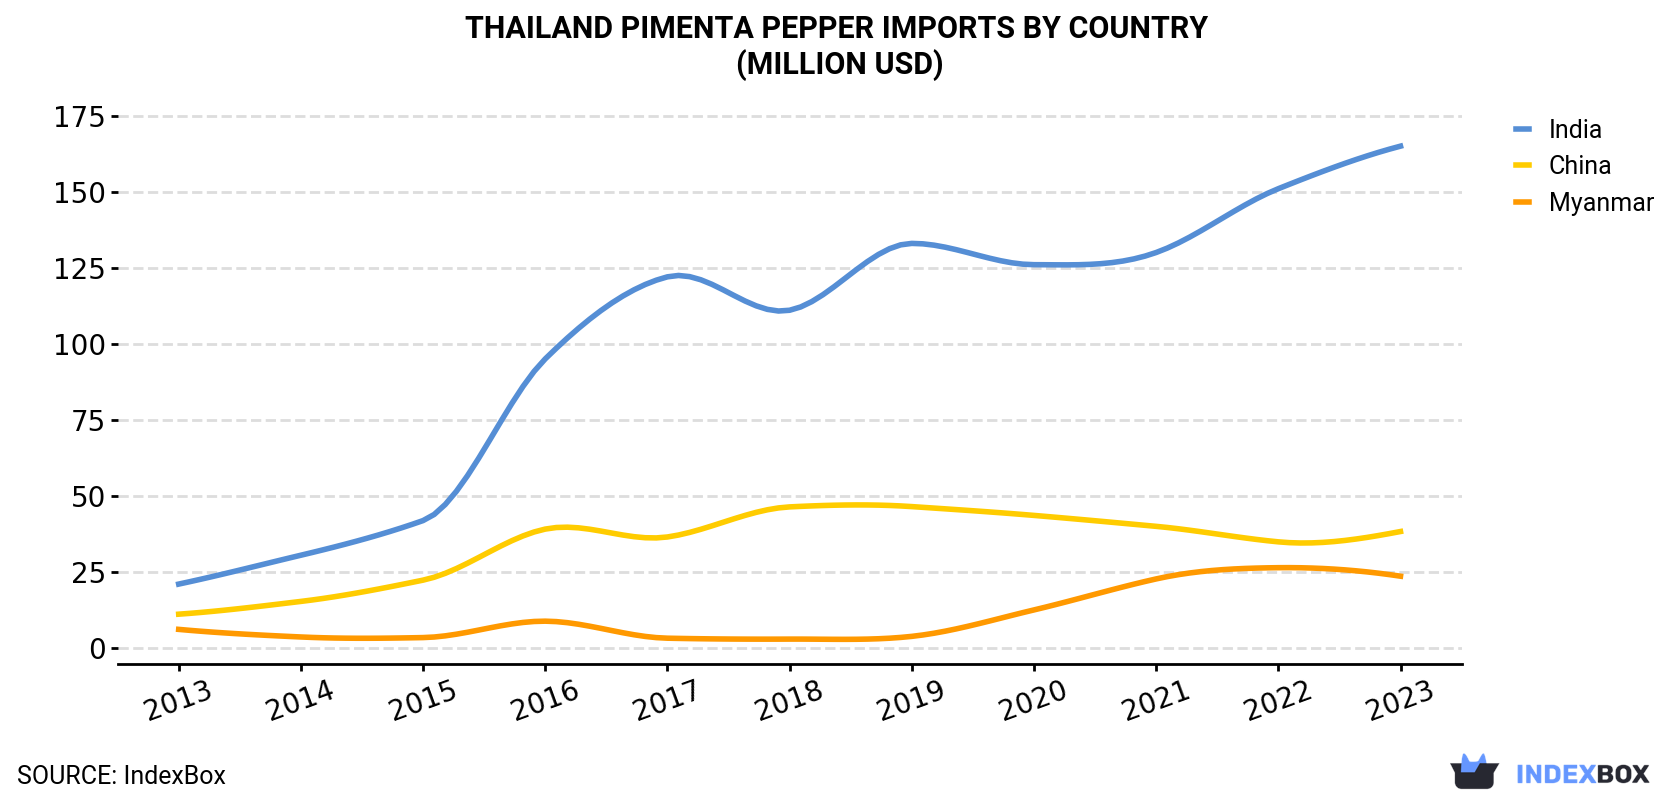 Thailand Pimenta Pepper Imports By Country (Million USD)